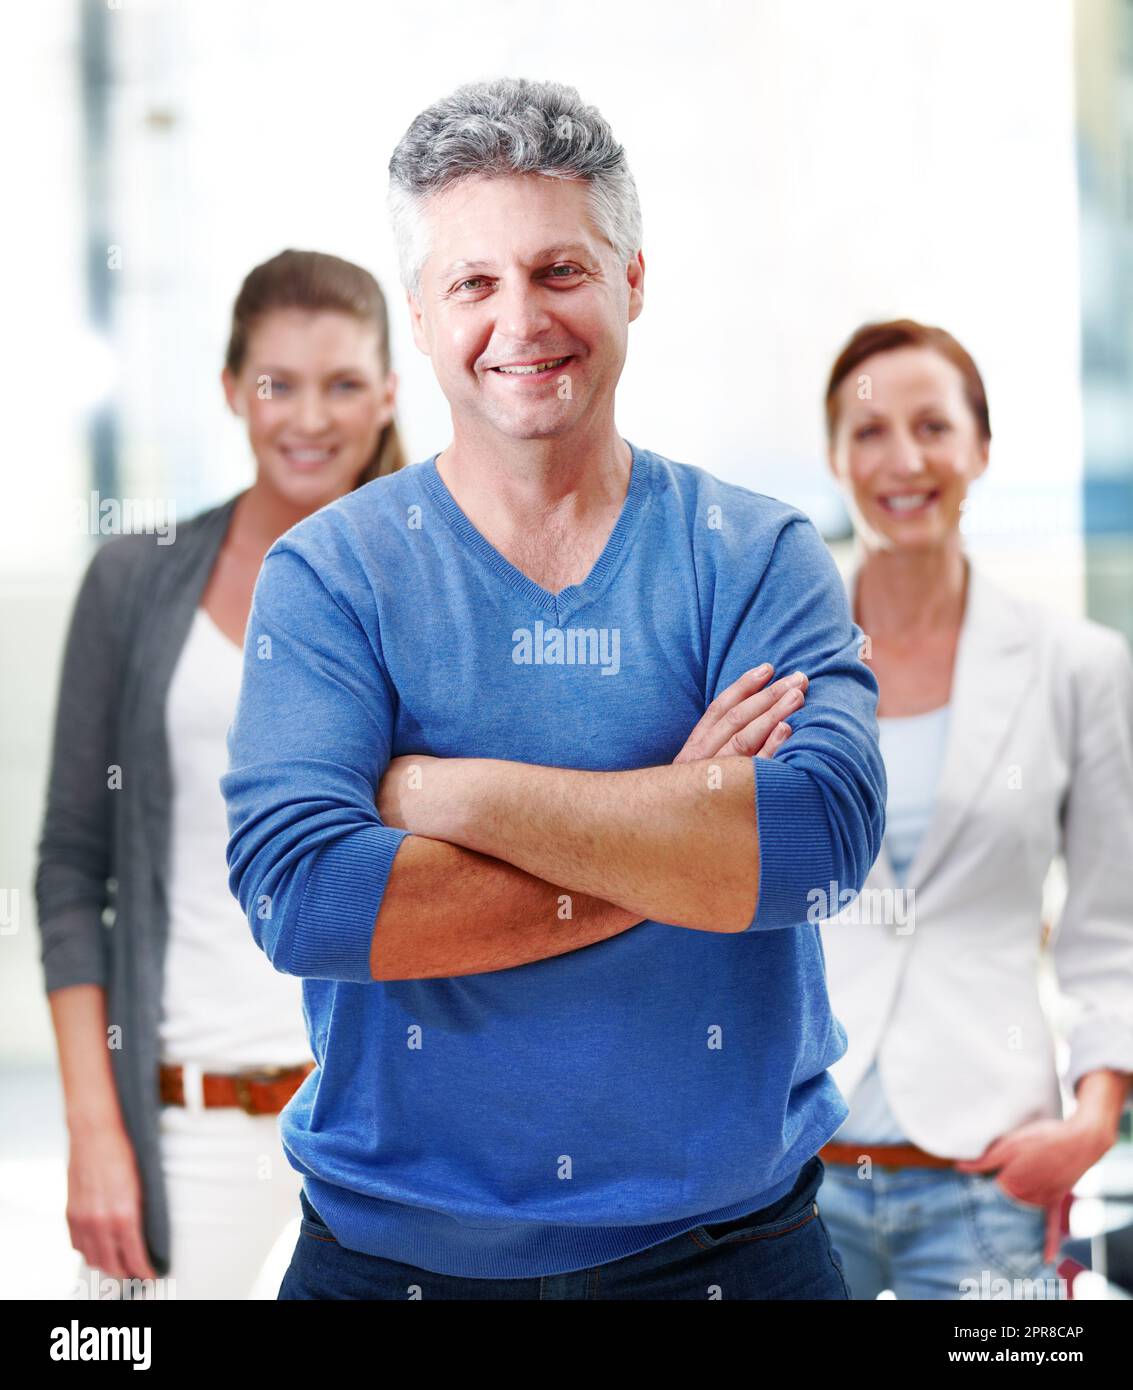 Expert in the field. Portrait of a mature businessman standing confidently with his co-workers behind him. Stock Photo